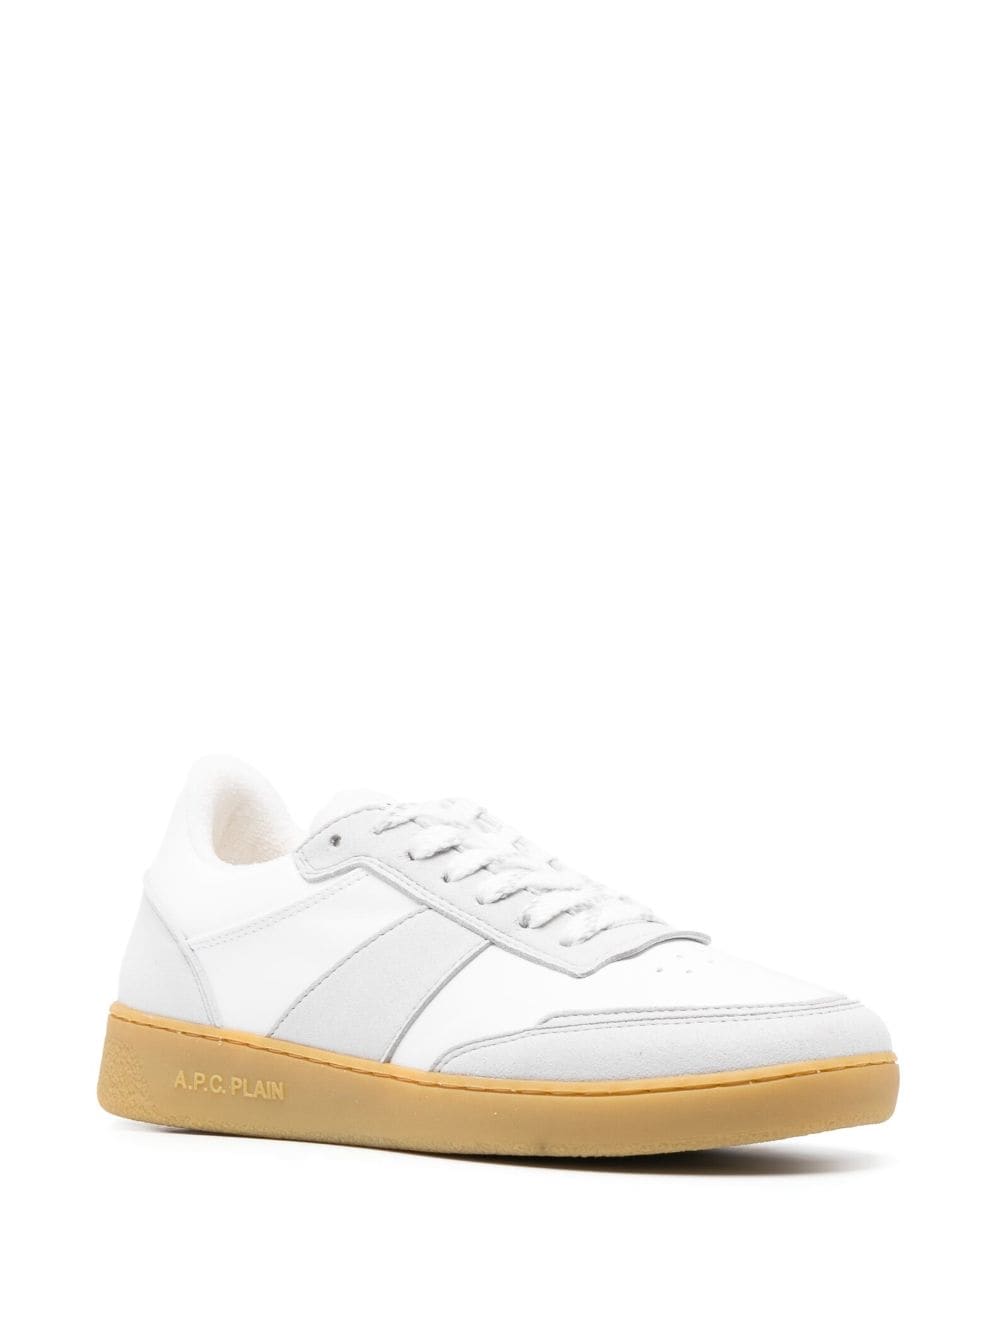 Image 2 of A.P.C. Plain low-top sneakers